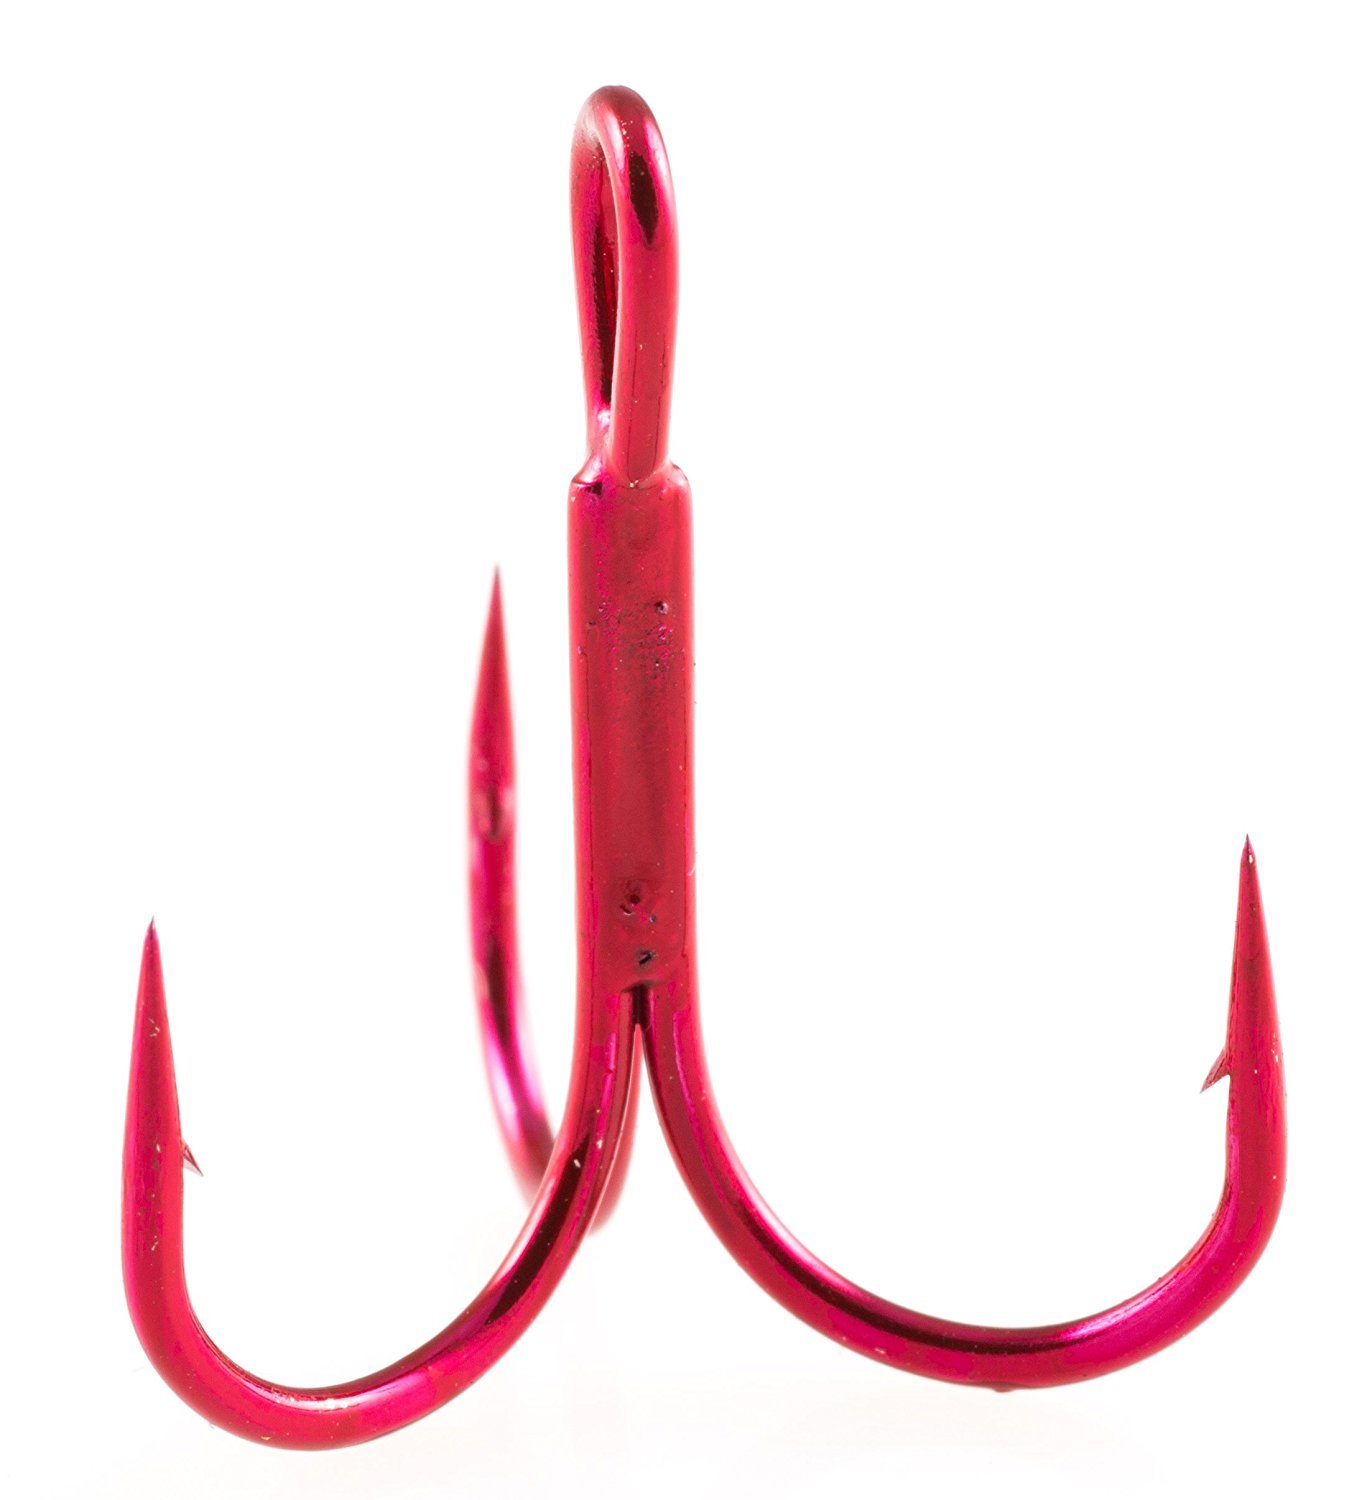 5 Pack of Surecatch Red Chemically Sharpened Treble Fishing Hooks